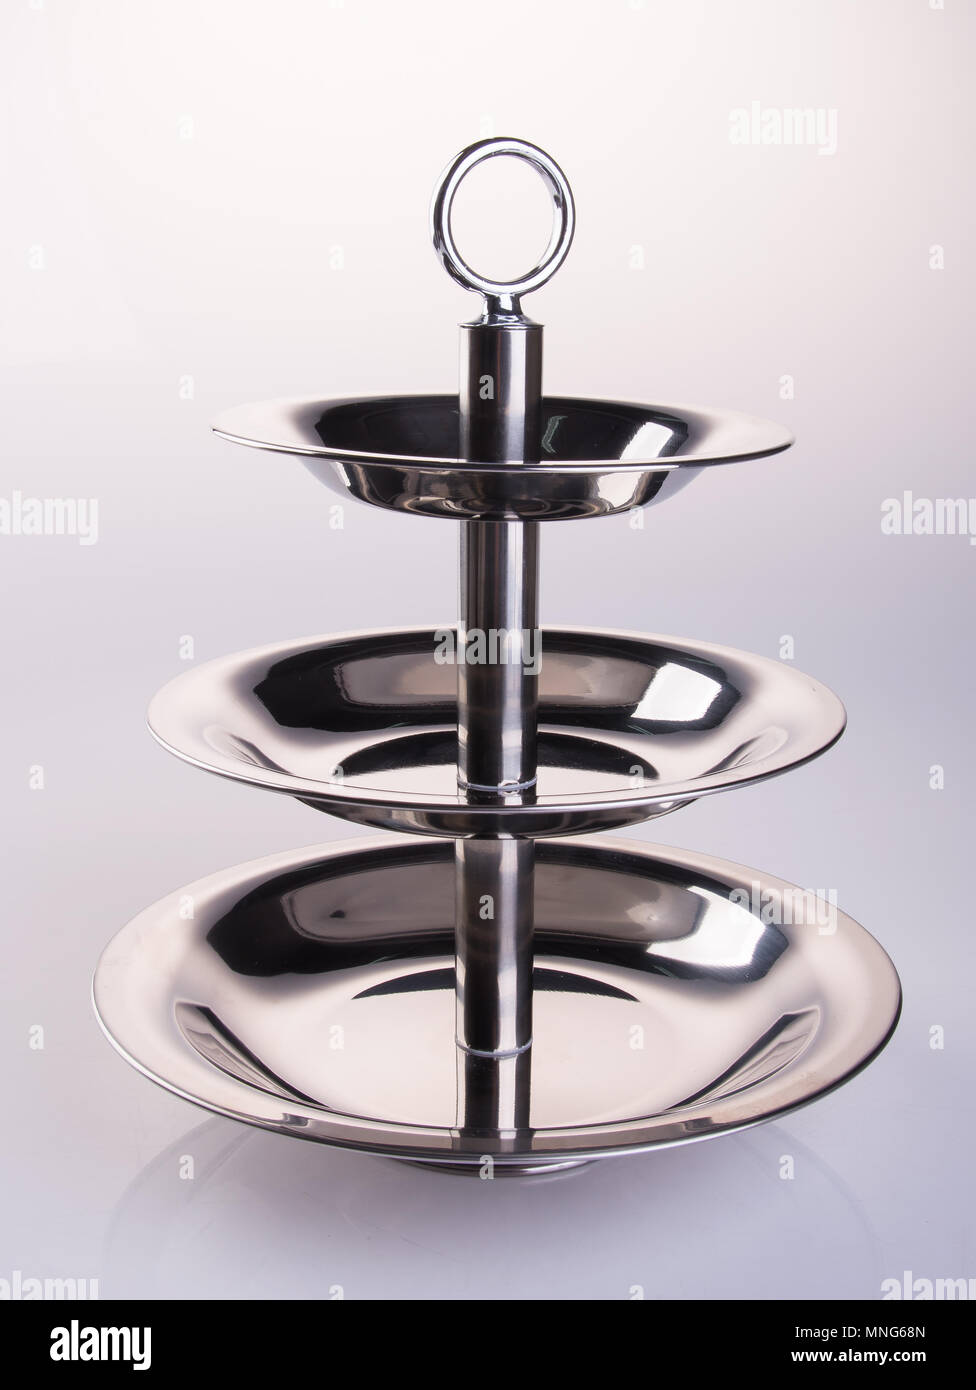 tray or three tier serving tray on a background Stock Photo - Alamy